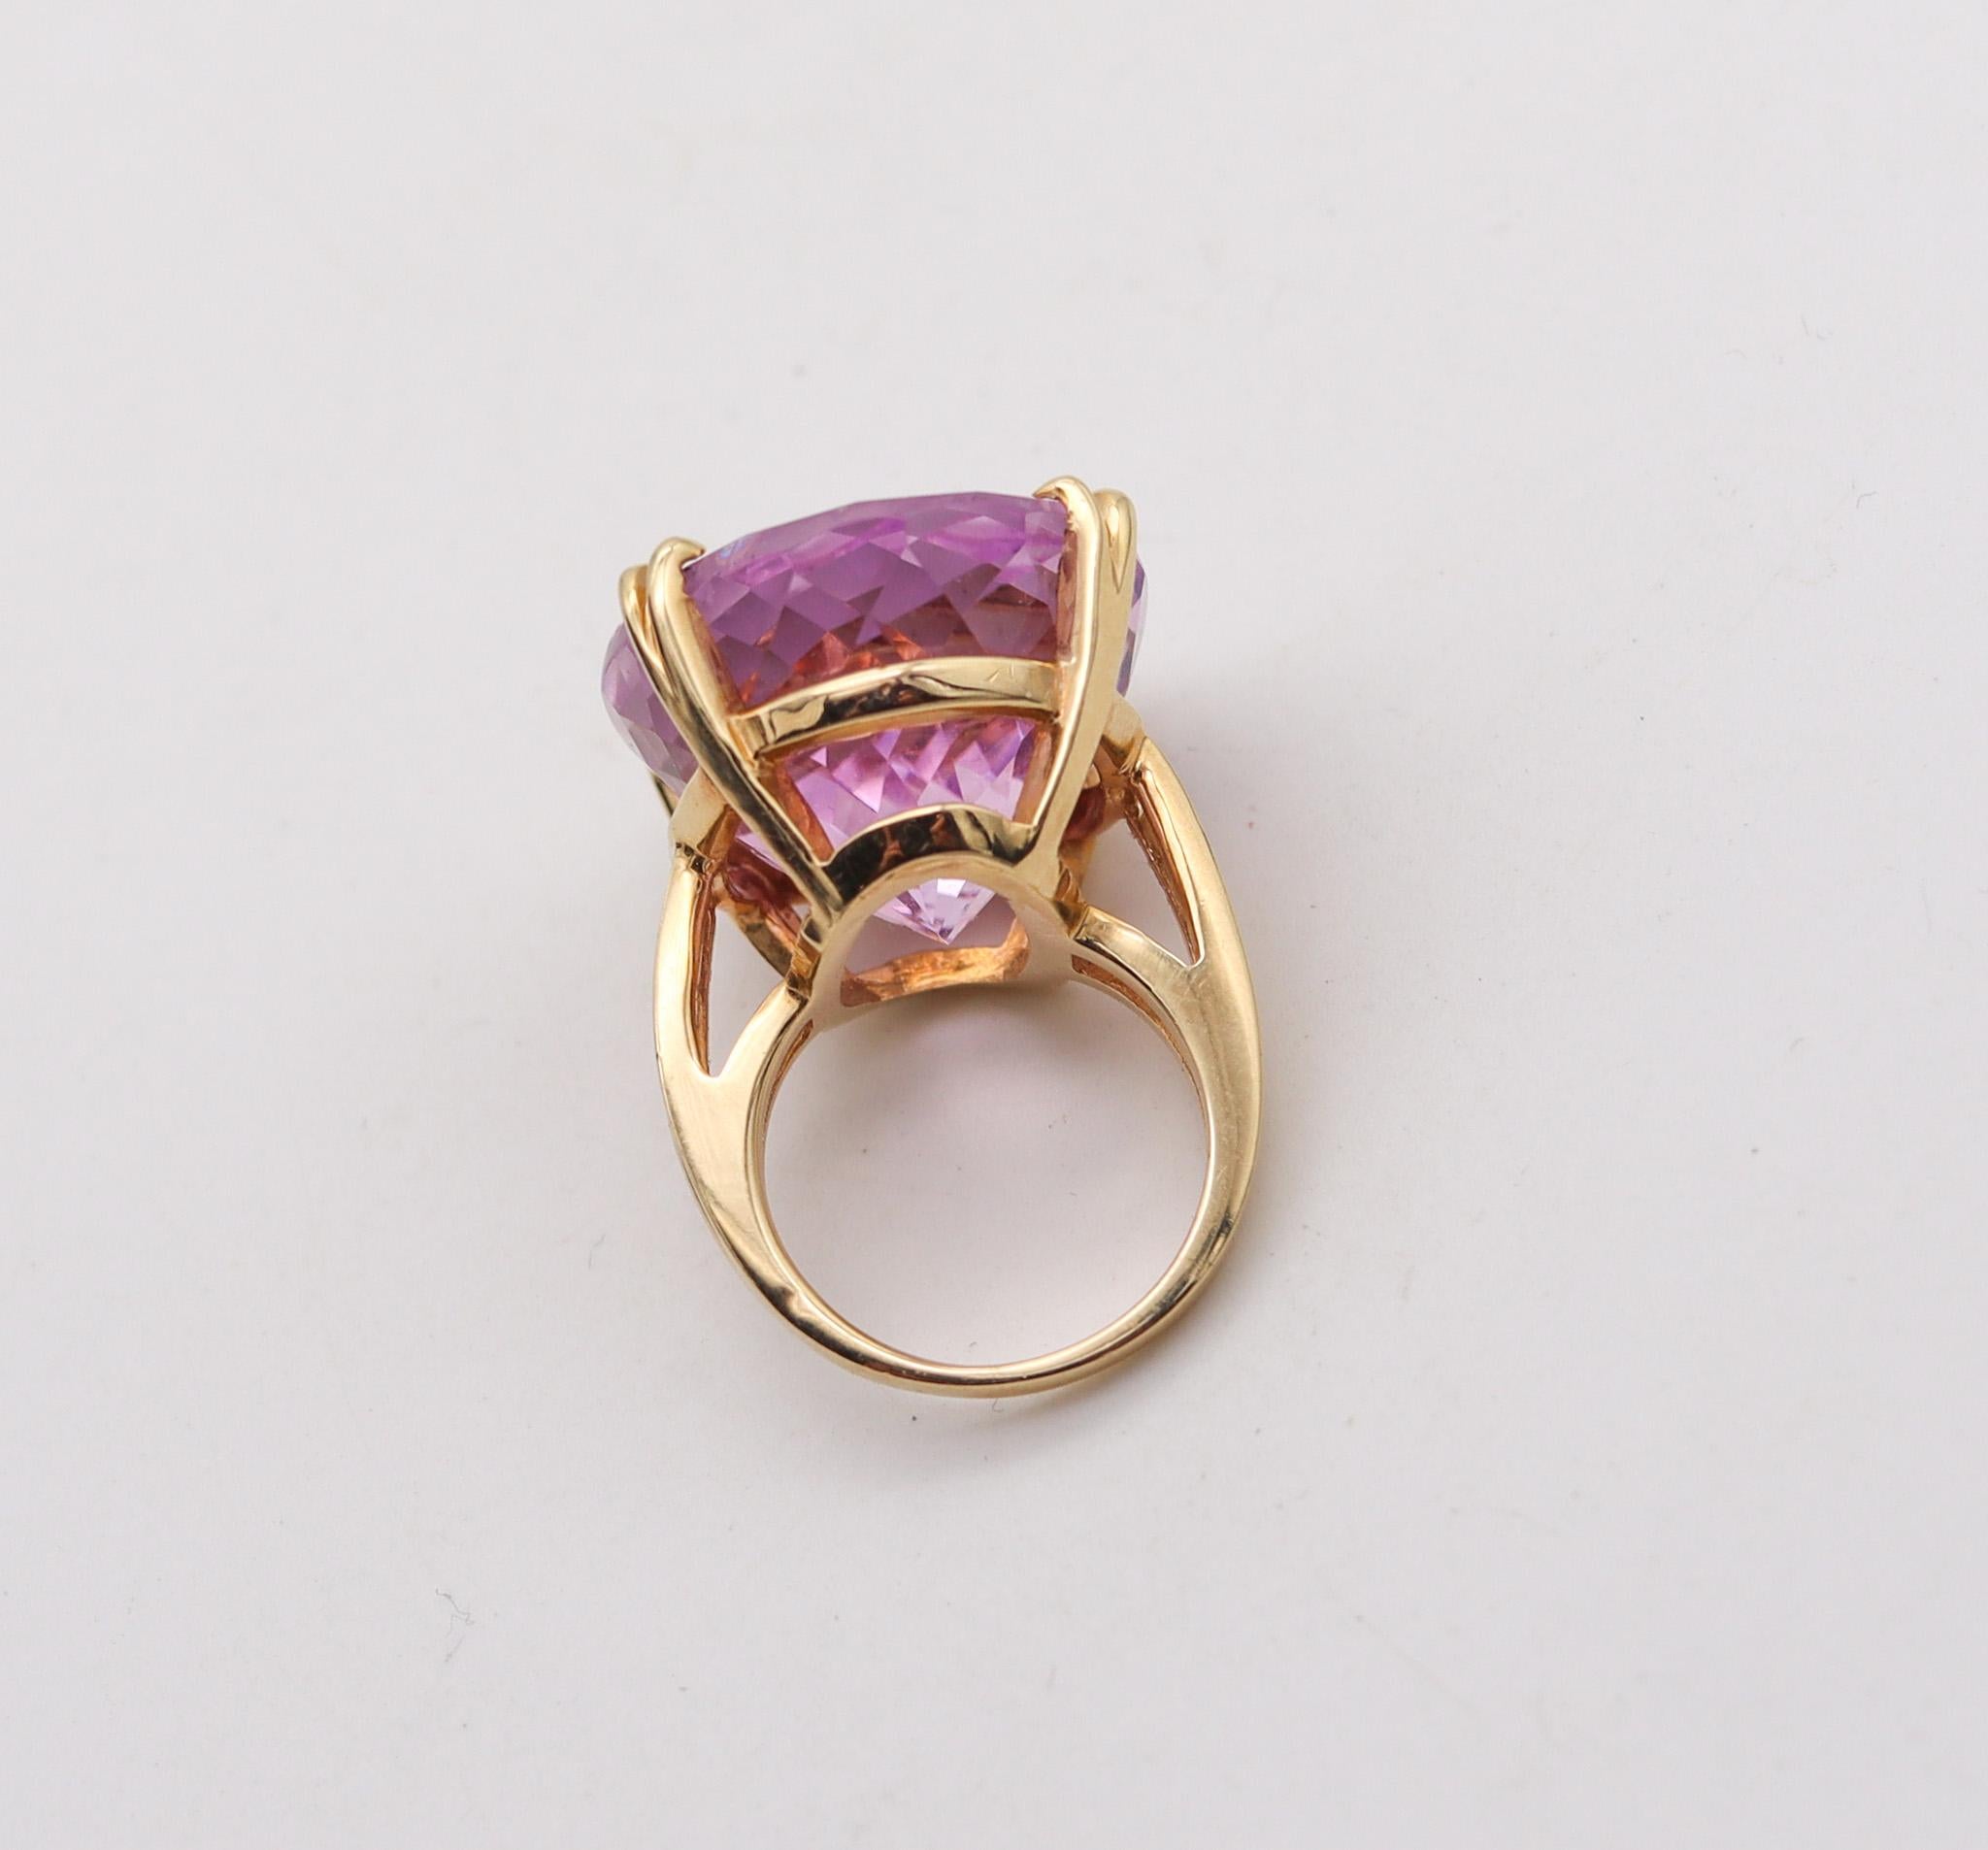 Italian Modernist Cocktail Ring In Solid 14Kt Yellow Gold With 52.08 Cts Kunzite In Excellent Condition For Sale In Miami, FL